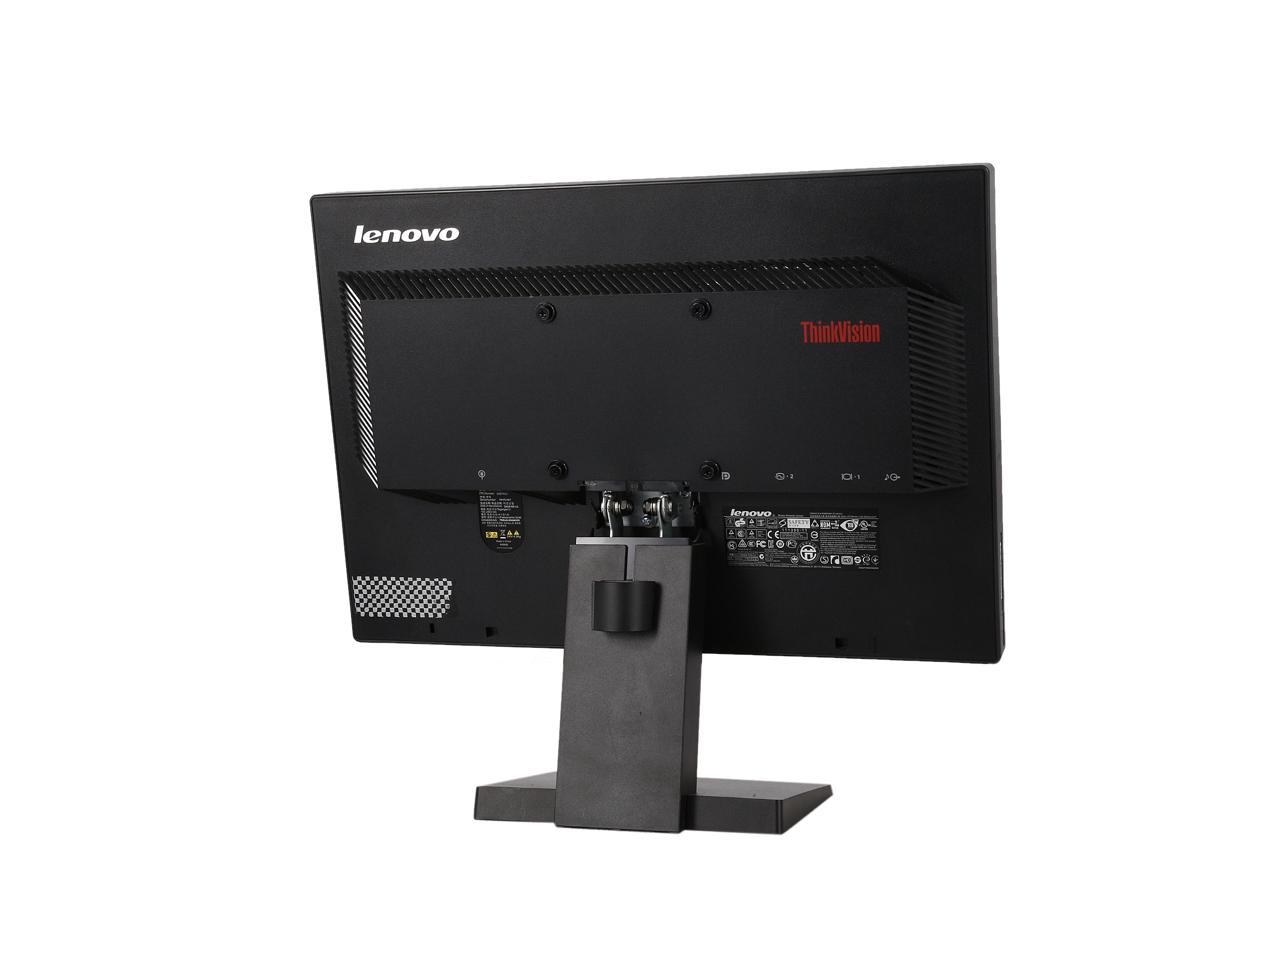 Refurbished Lenovo Thinkvision Lt1952p 19 Inch Wide Lcd Monitor